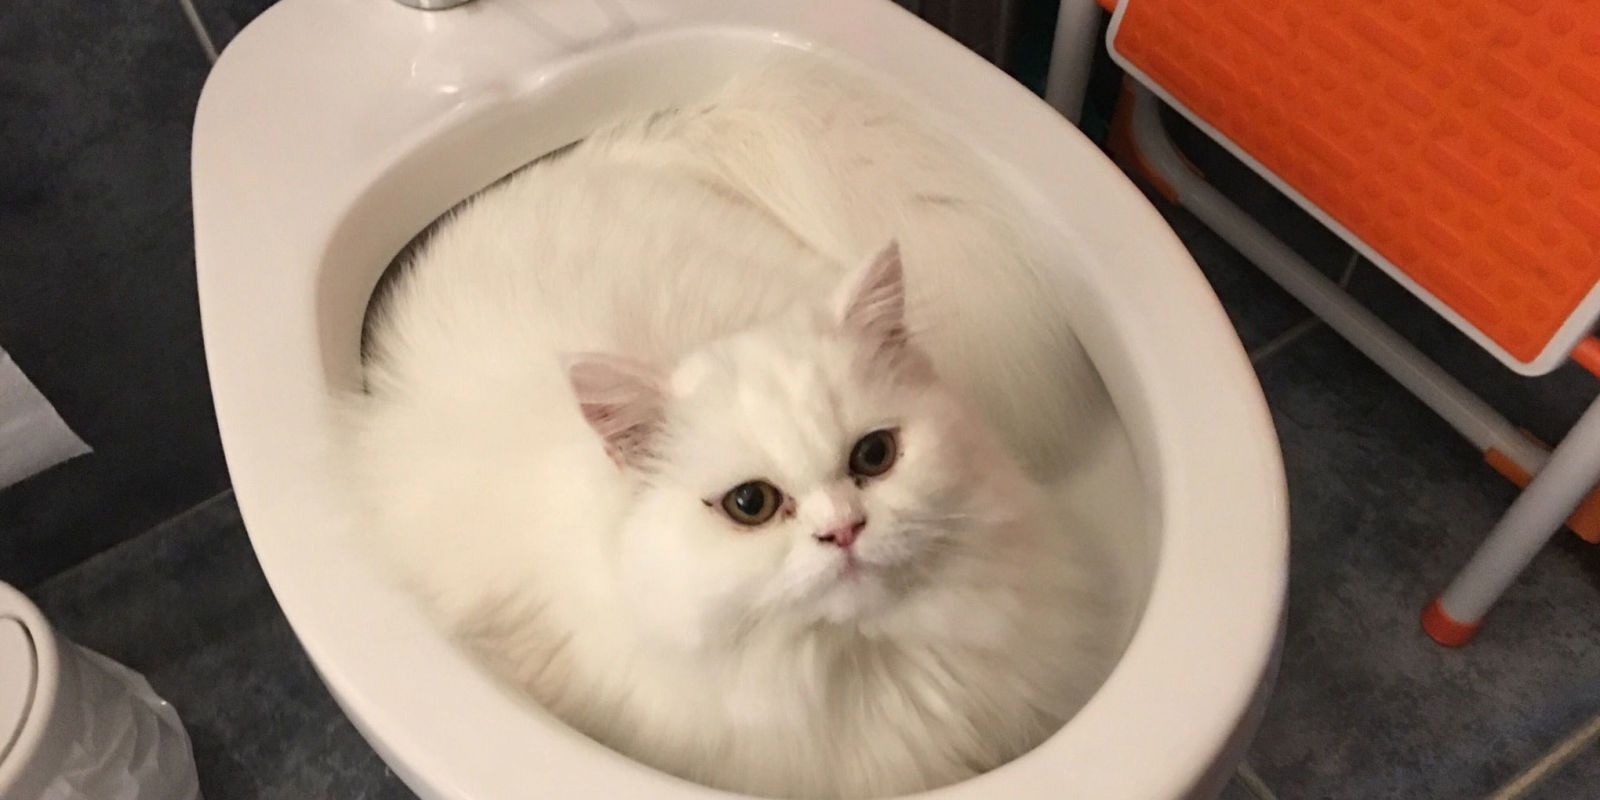 cat in a toilet bowl